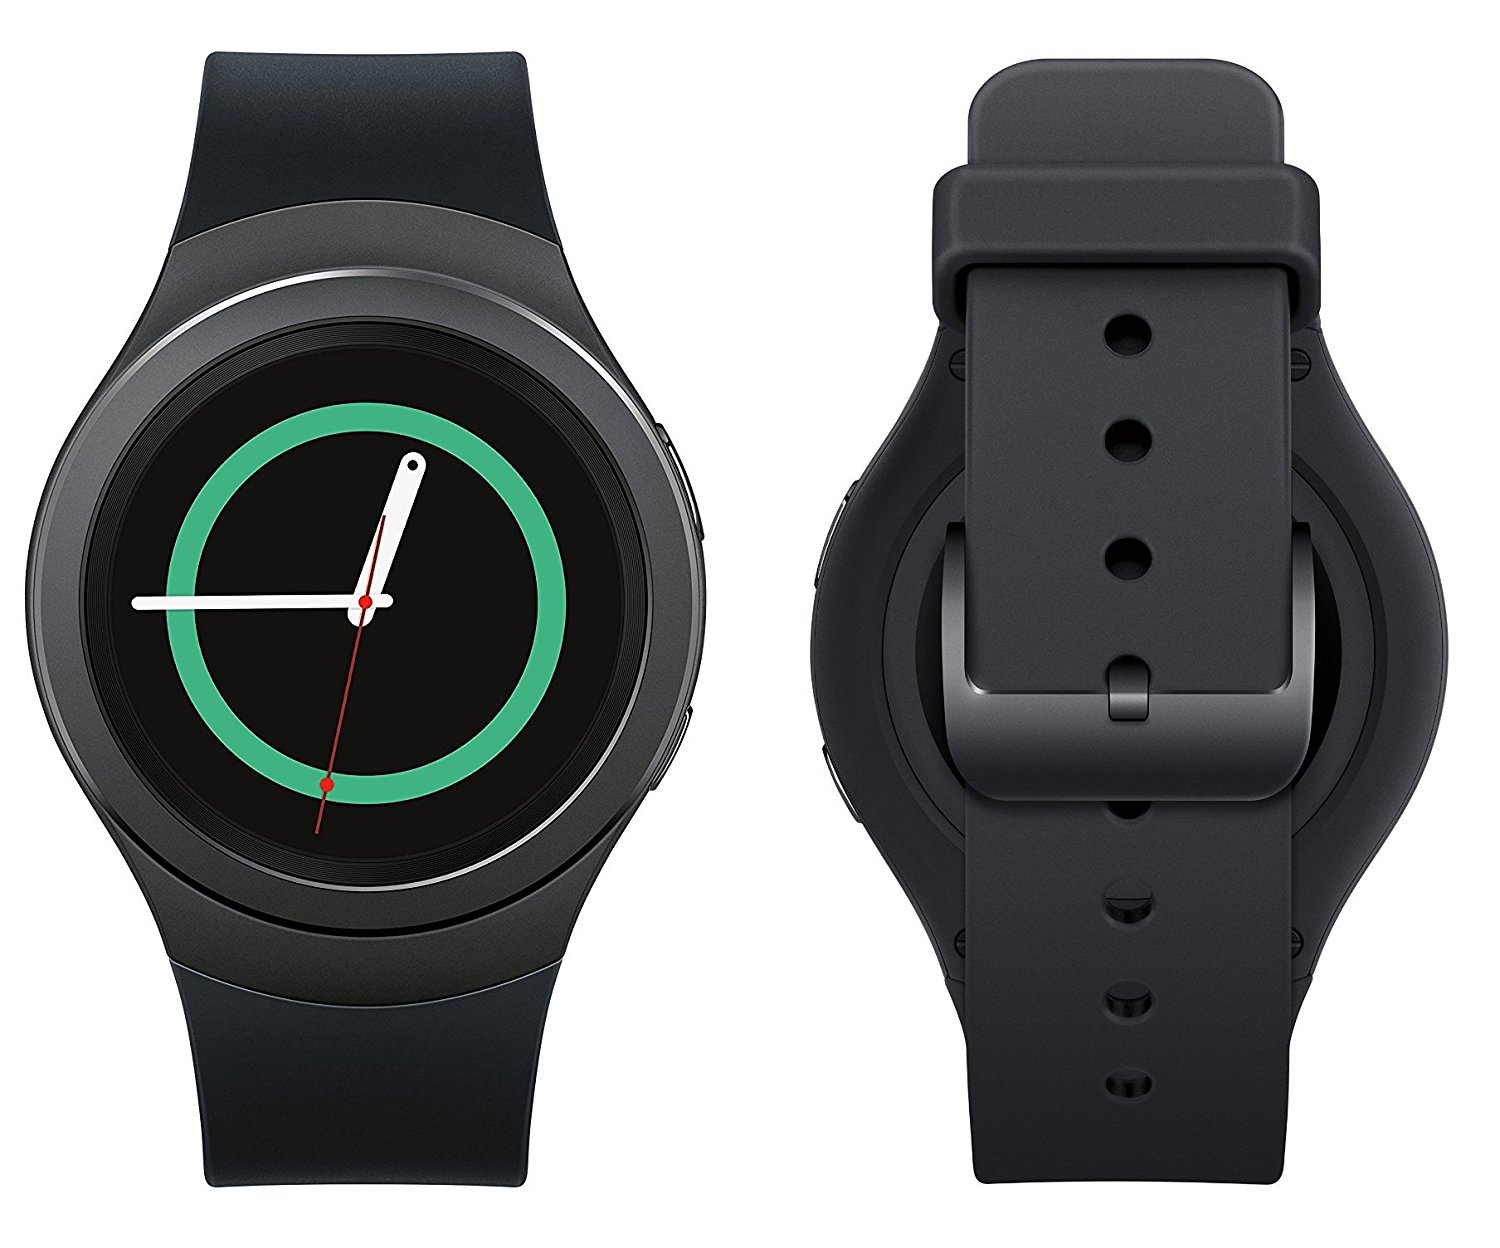 Samsung Gear S2 Android Smartwatch – Just $99.99!